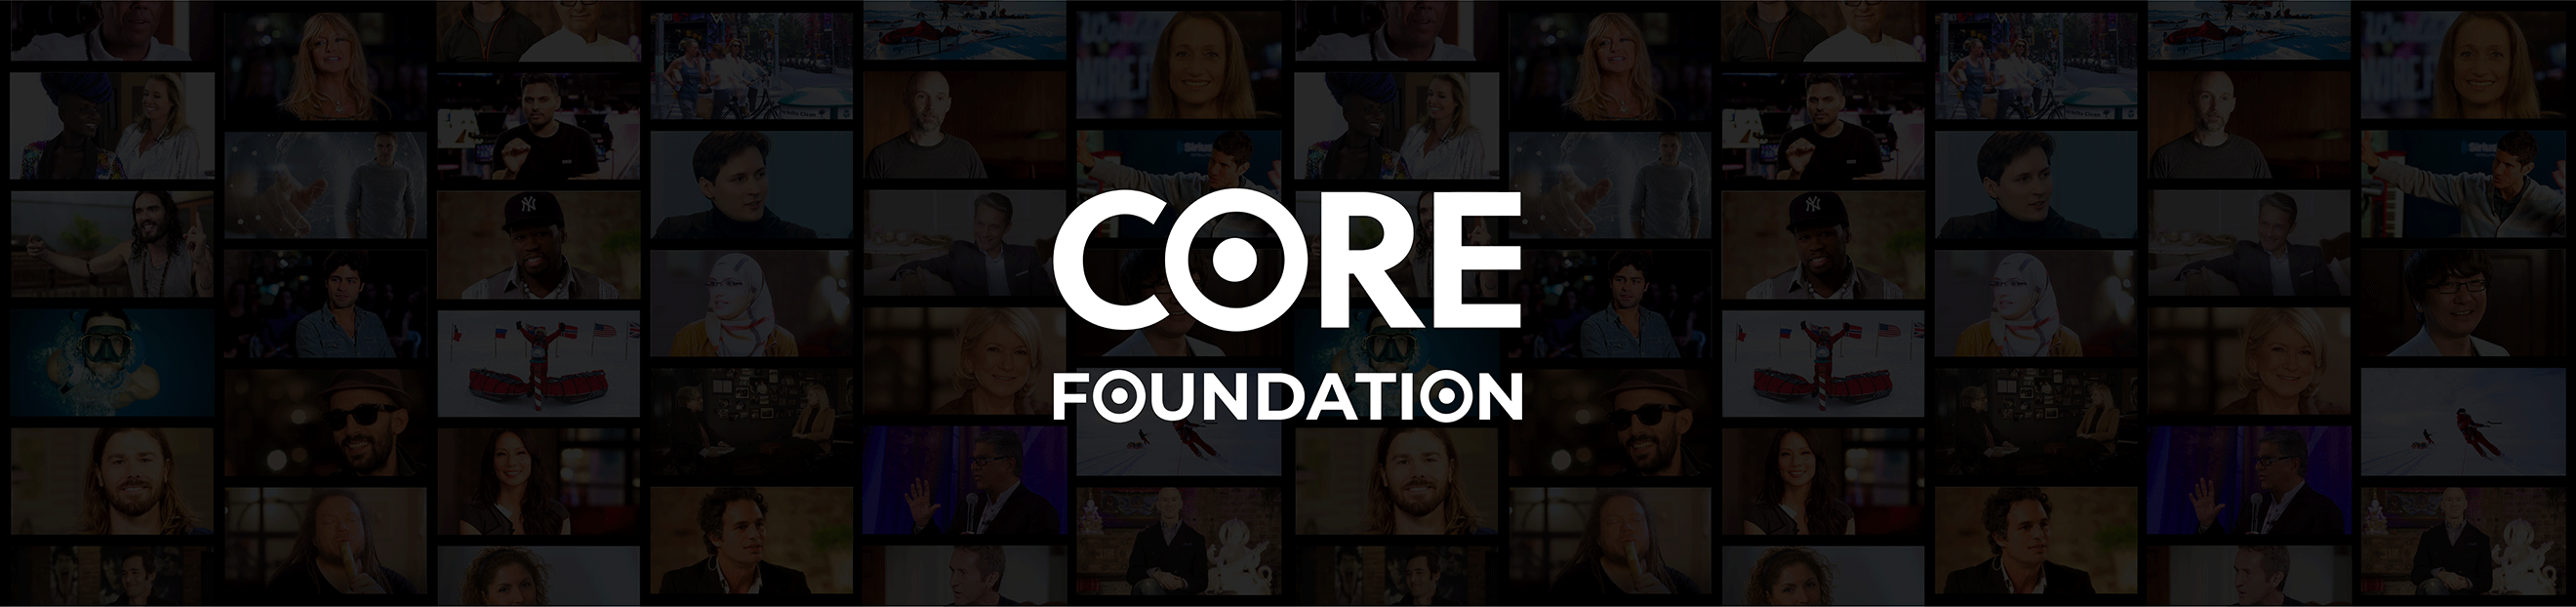 Banner for CORE Foundation